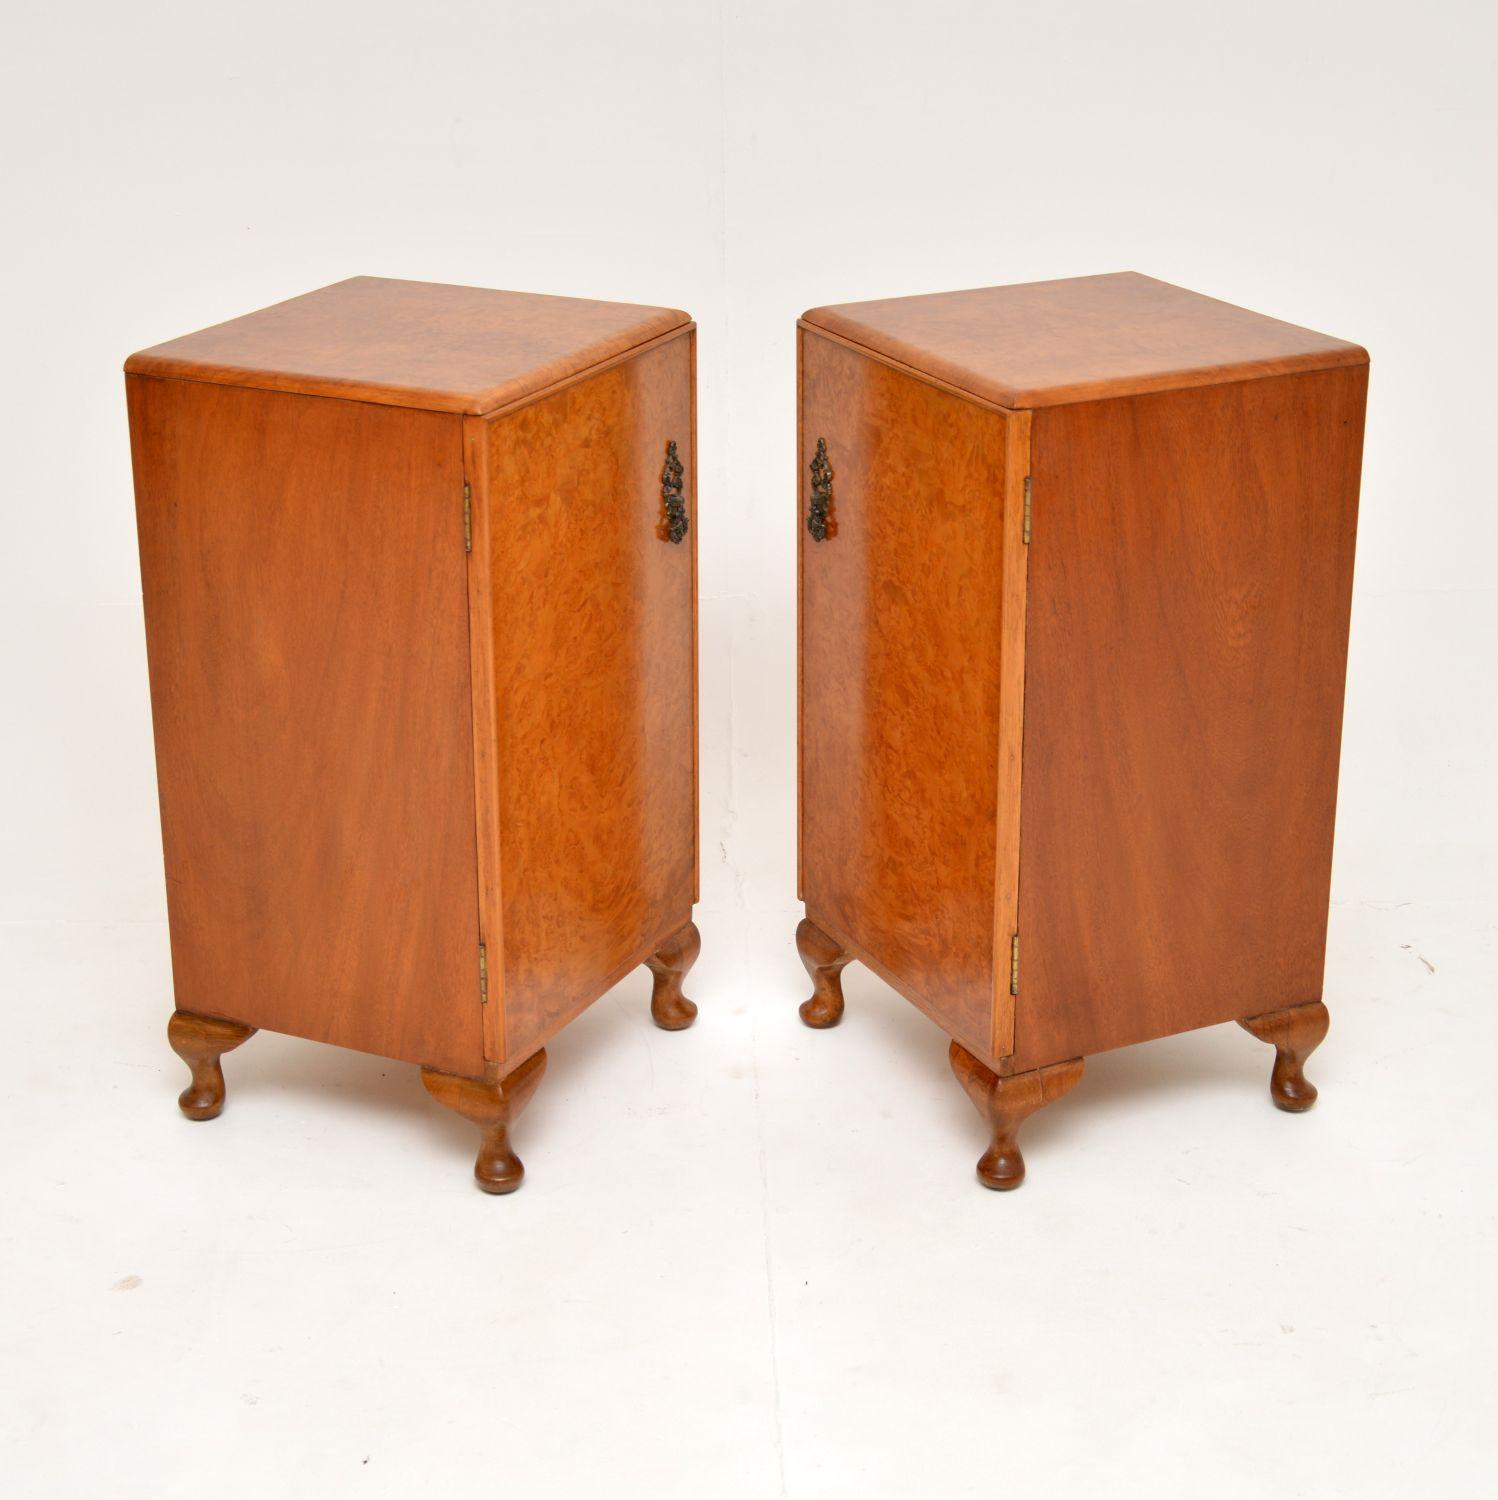 Queen Anne Pair of Antique Burr Walnut Bedside Cabinets